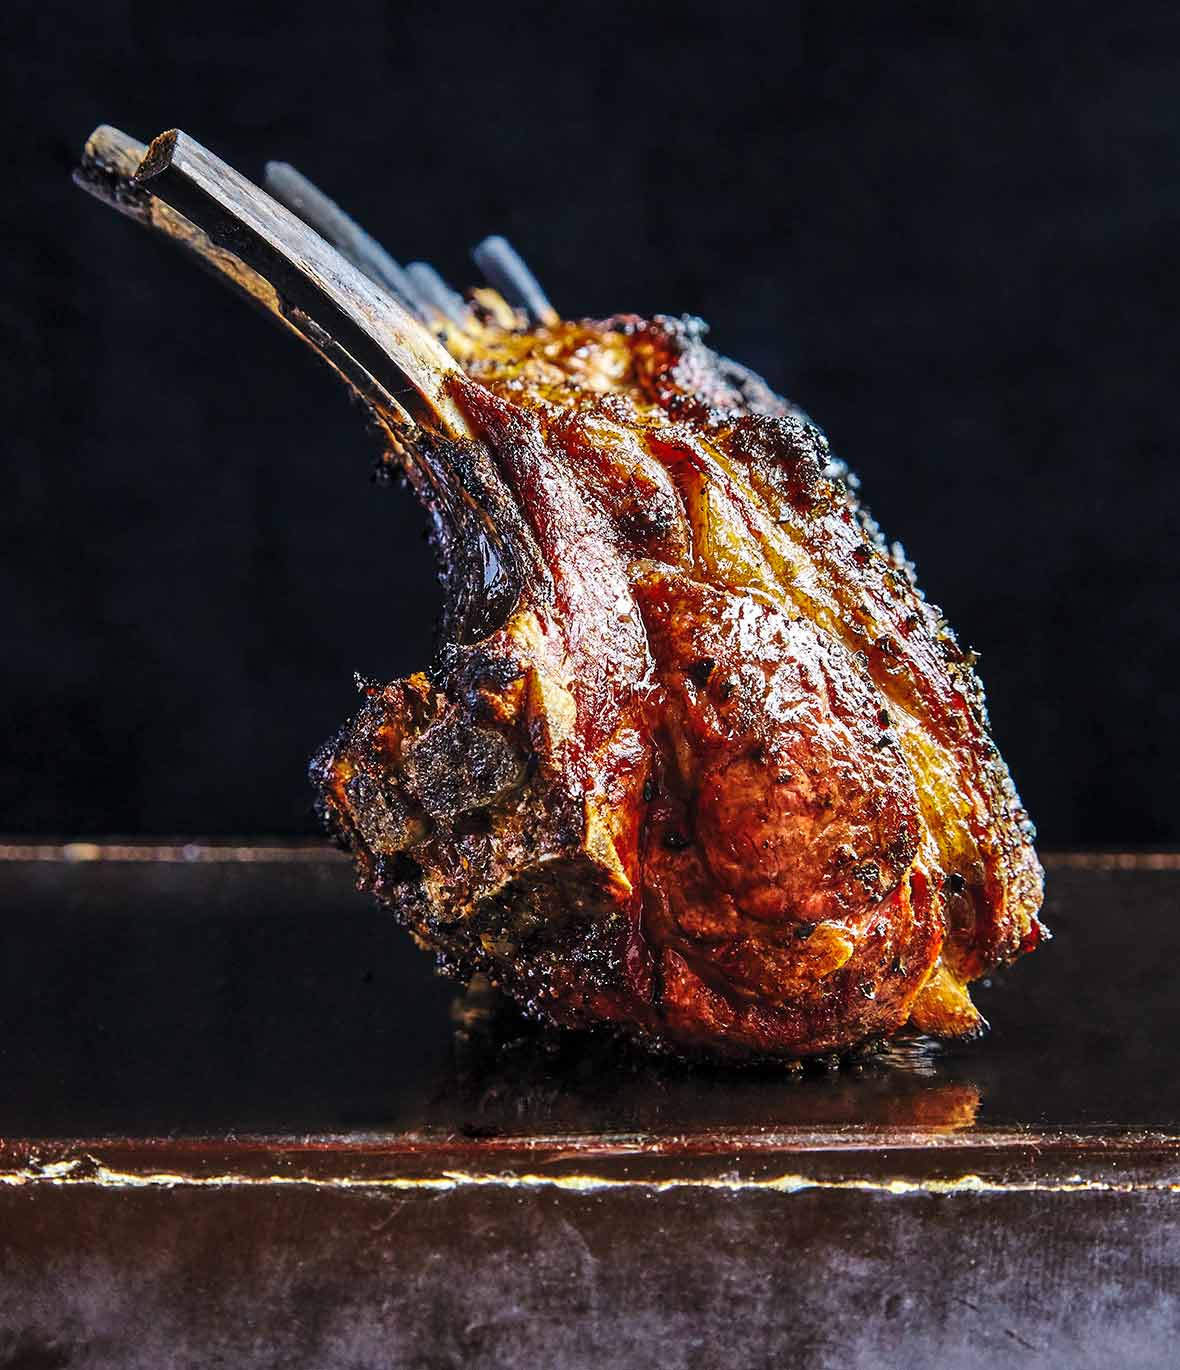 A deeply browned grilled rack on lamb sitting on a black surface.